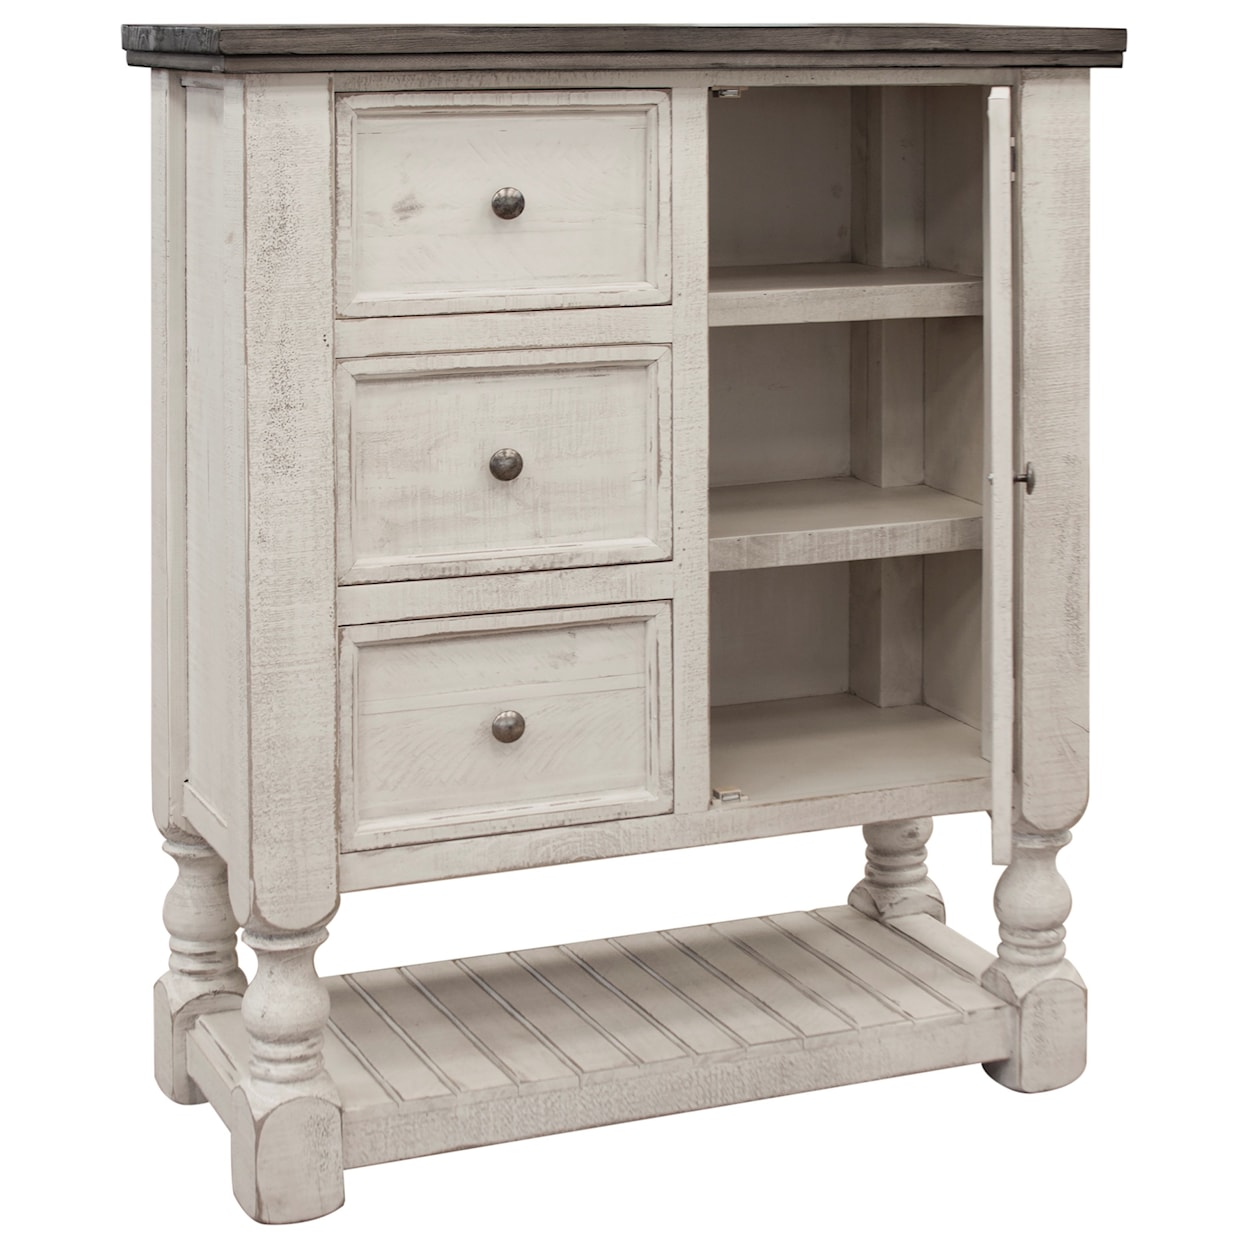 International Furniture Direct Stone Chest with Doors